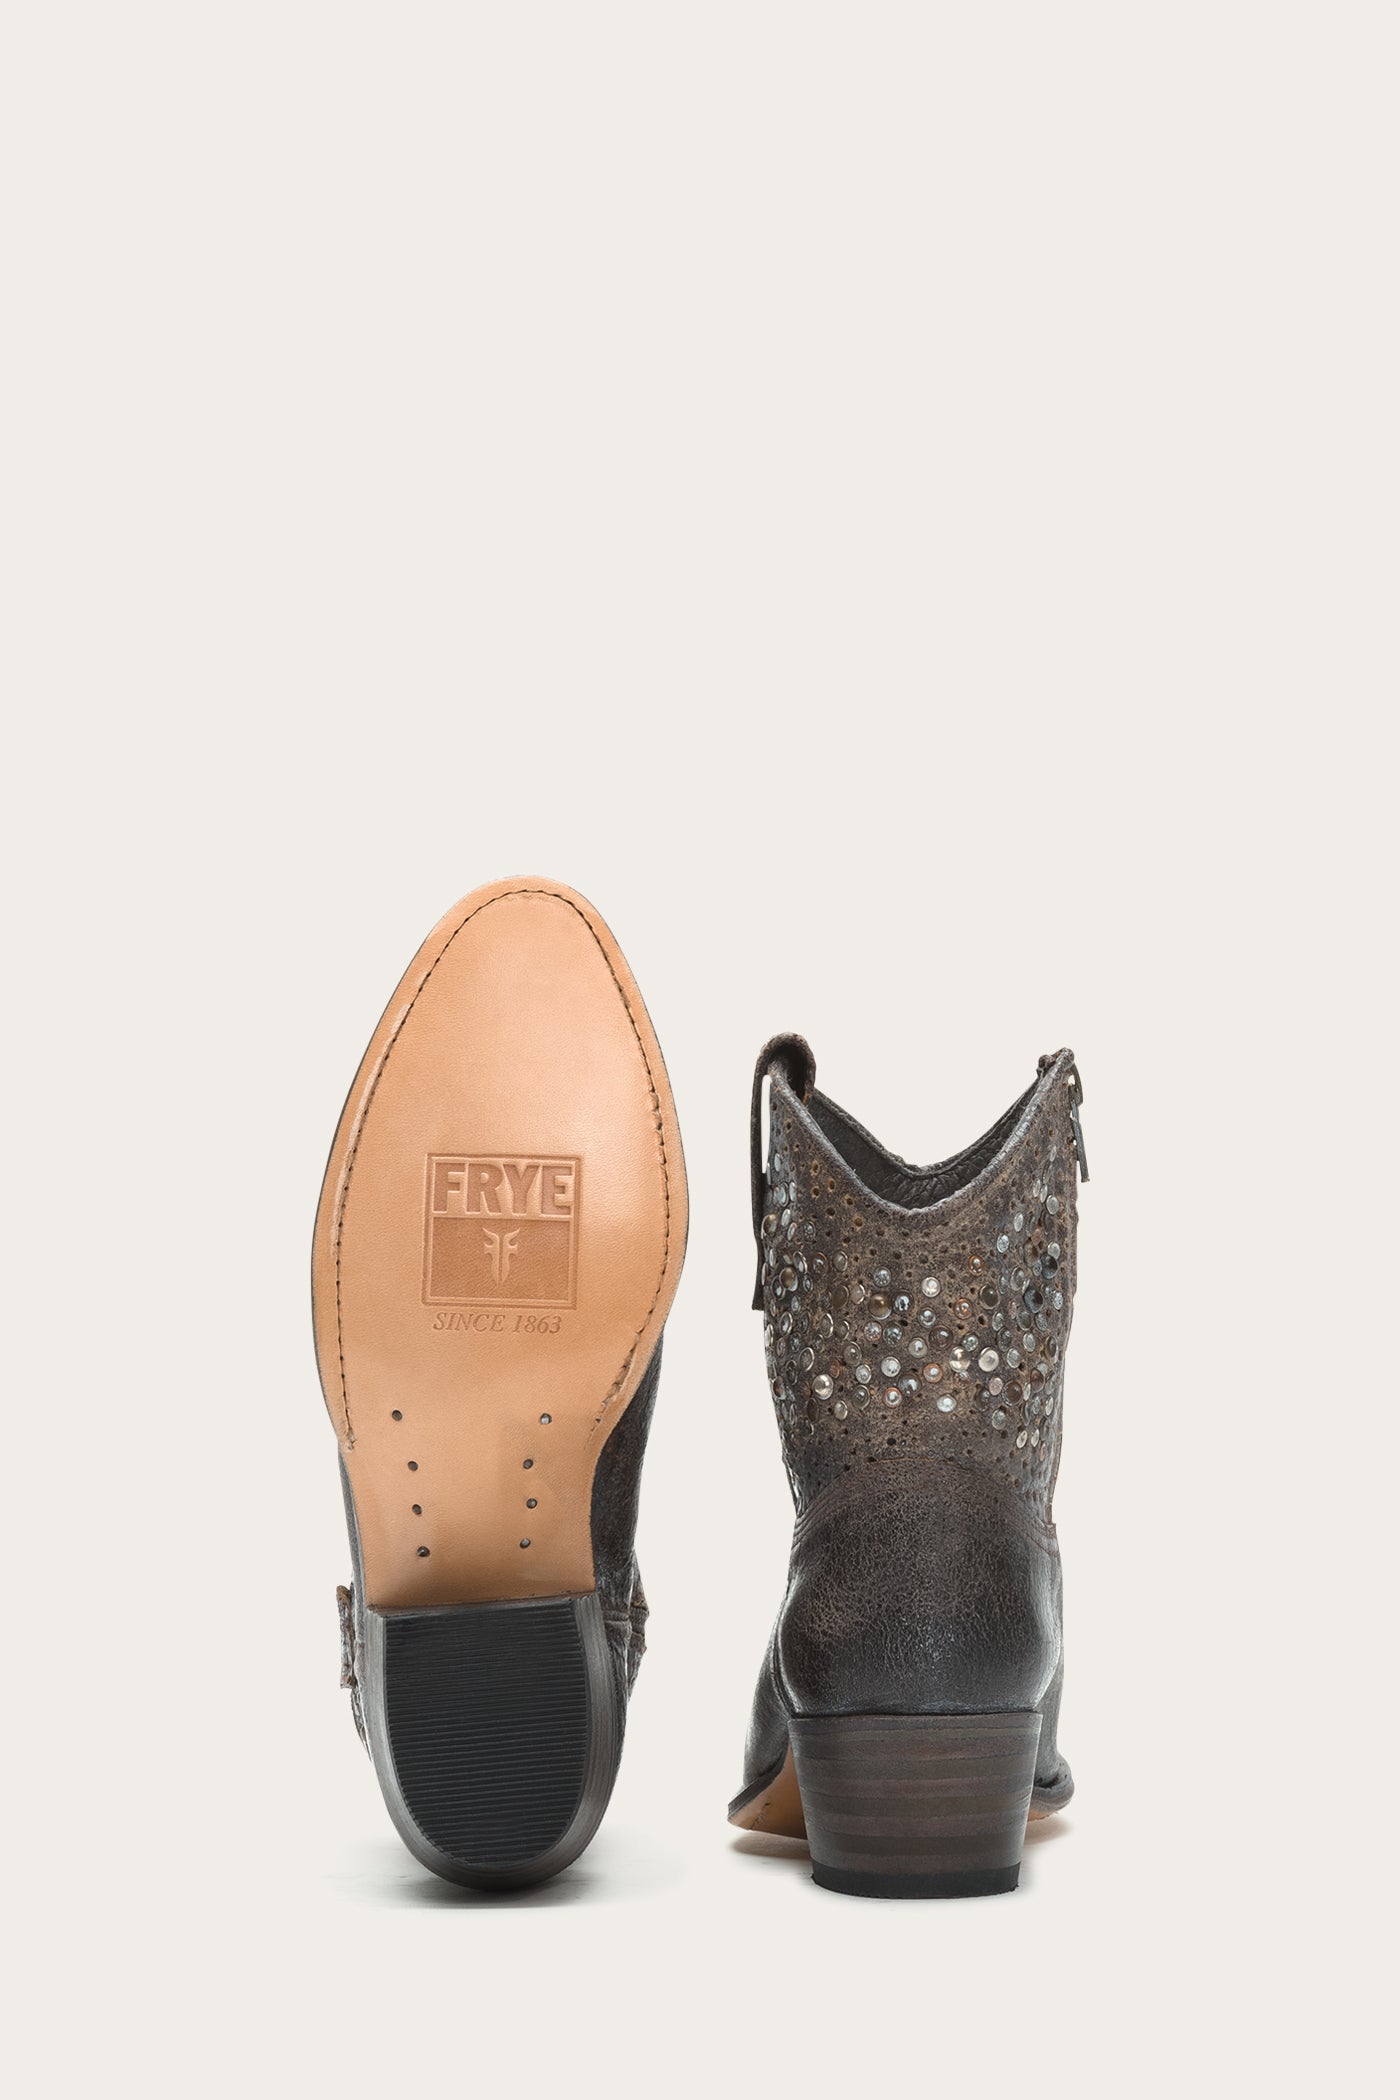 frye studded boots